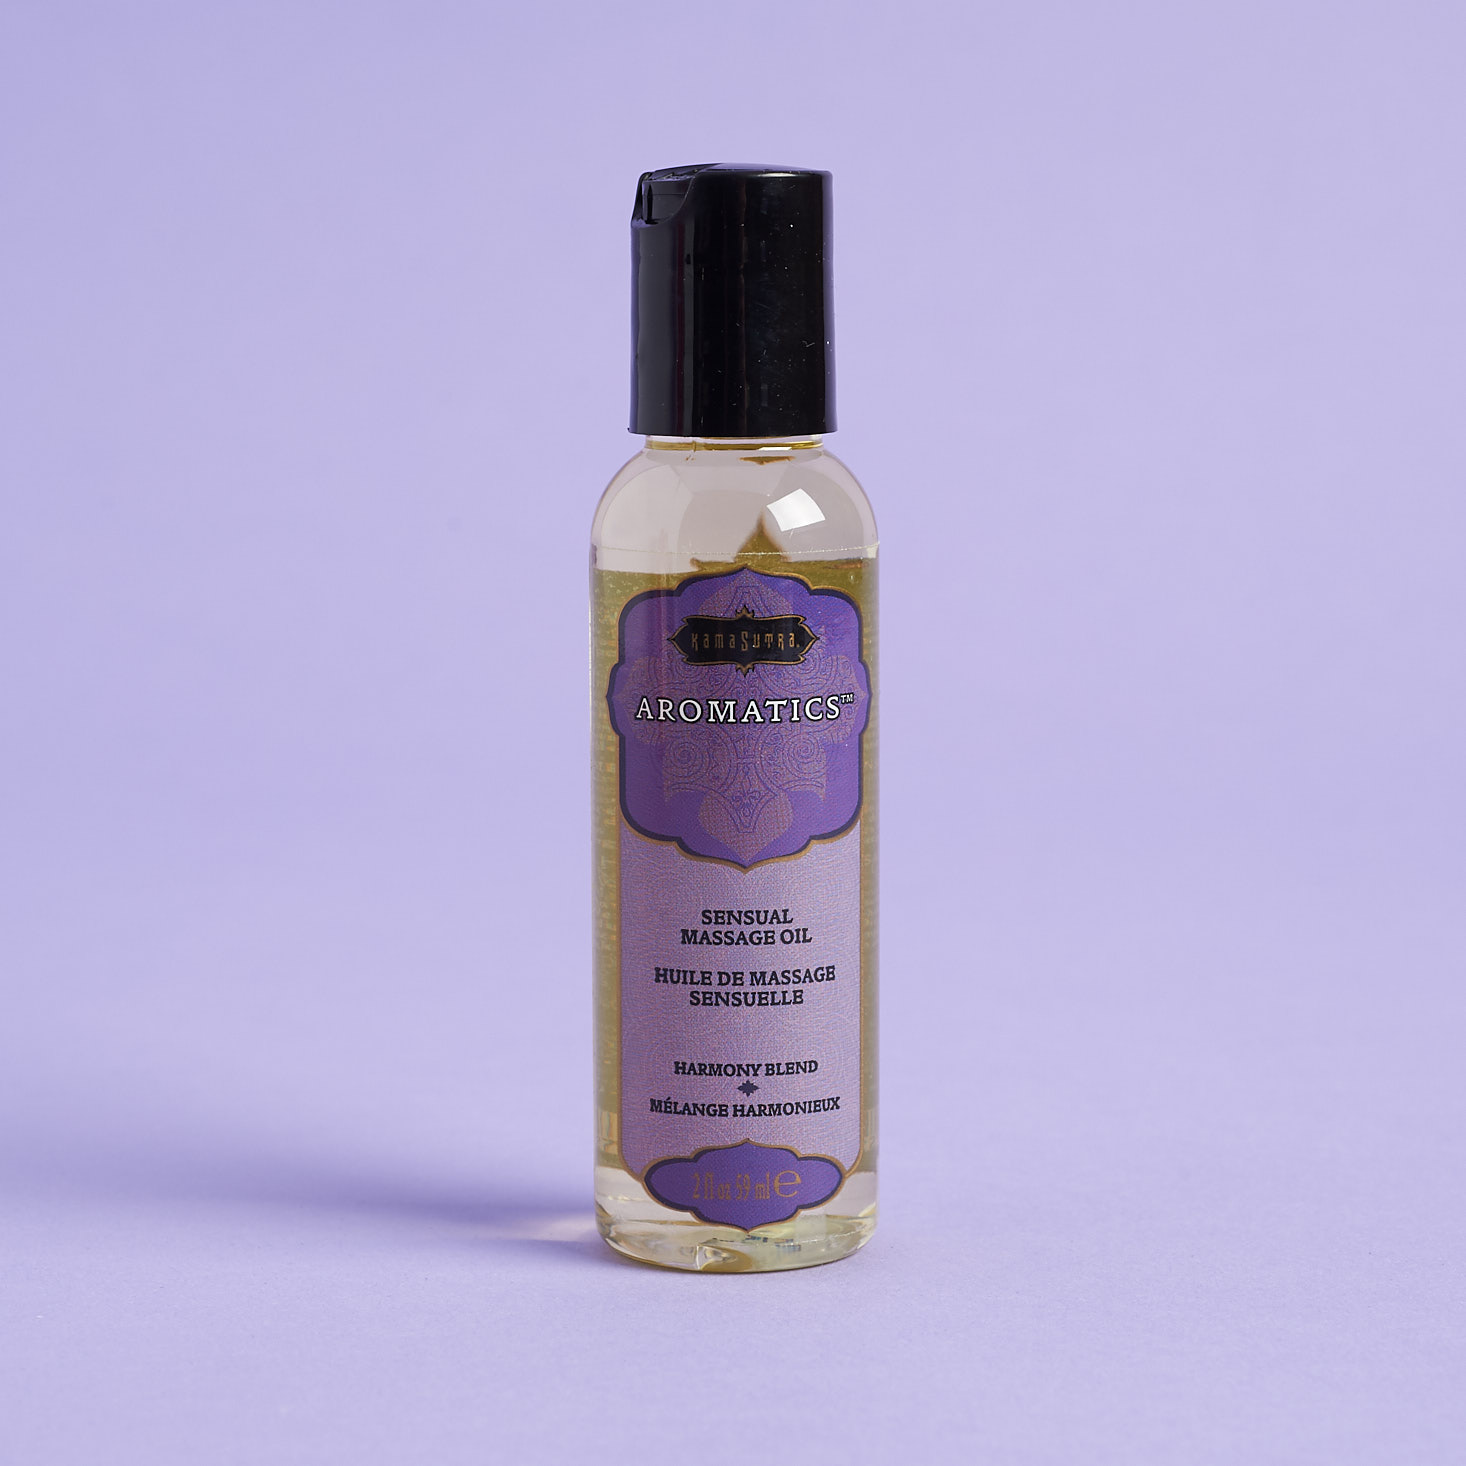 Heart and Honey May 2019 review massage oil